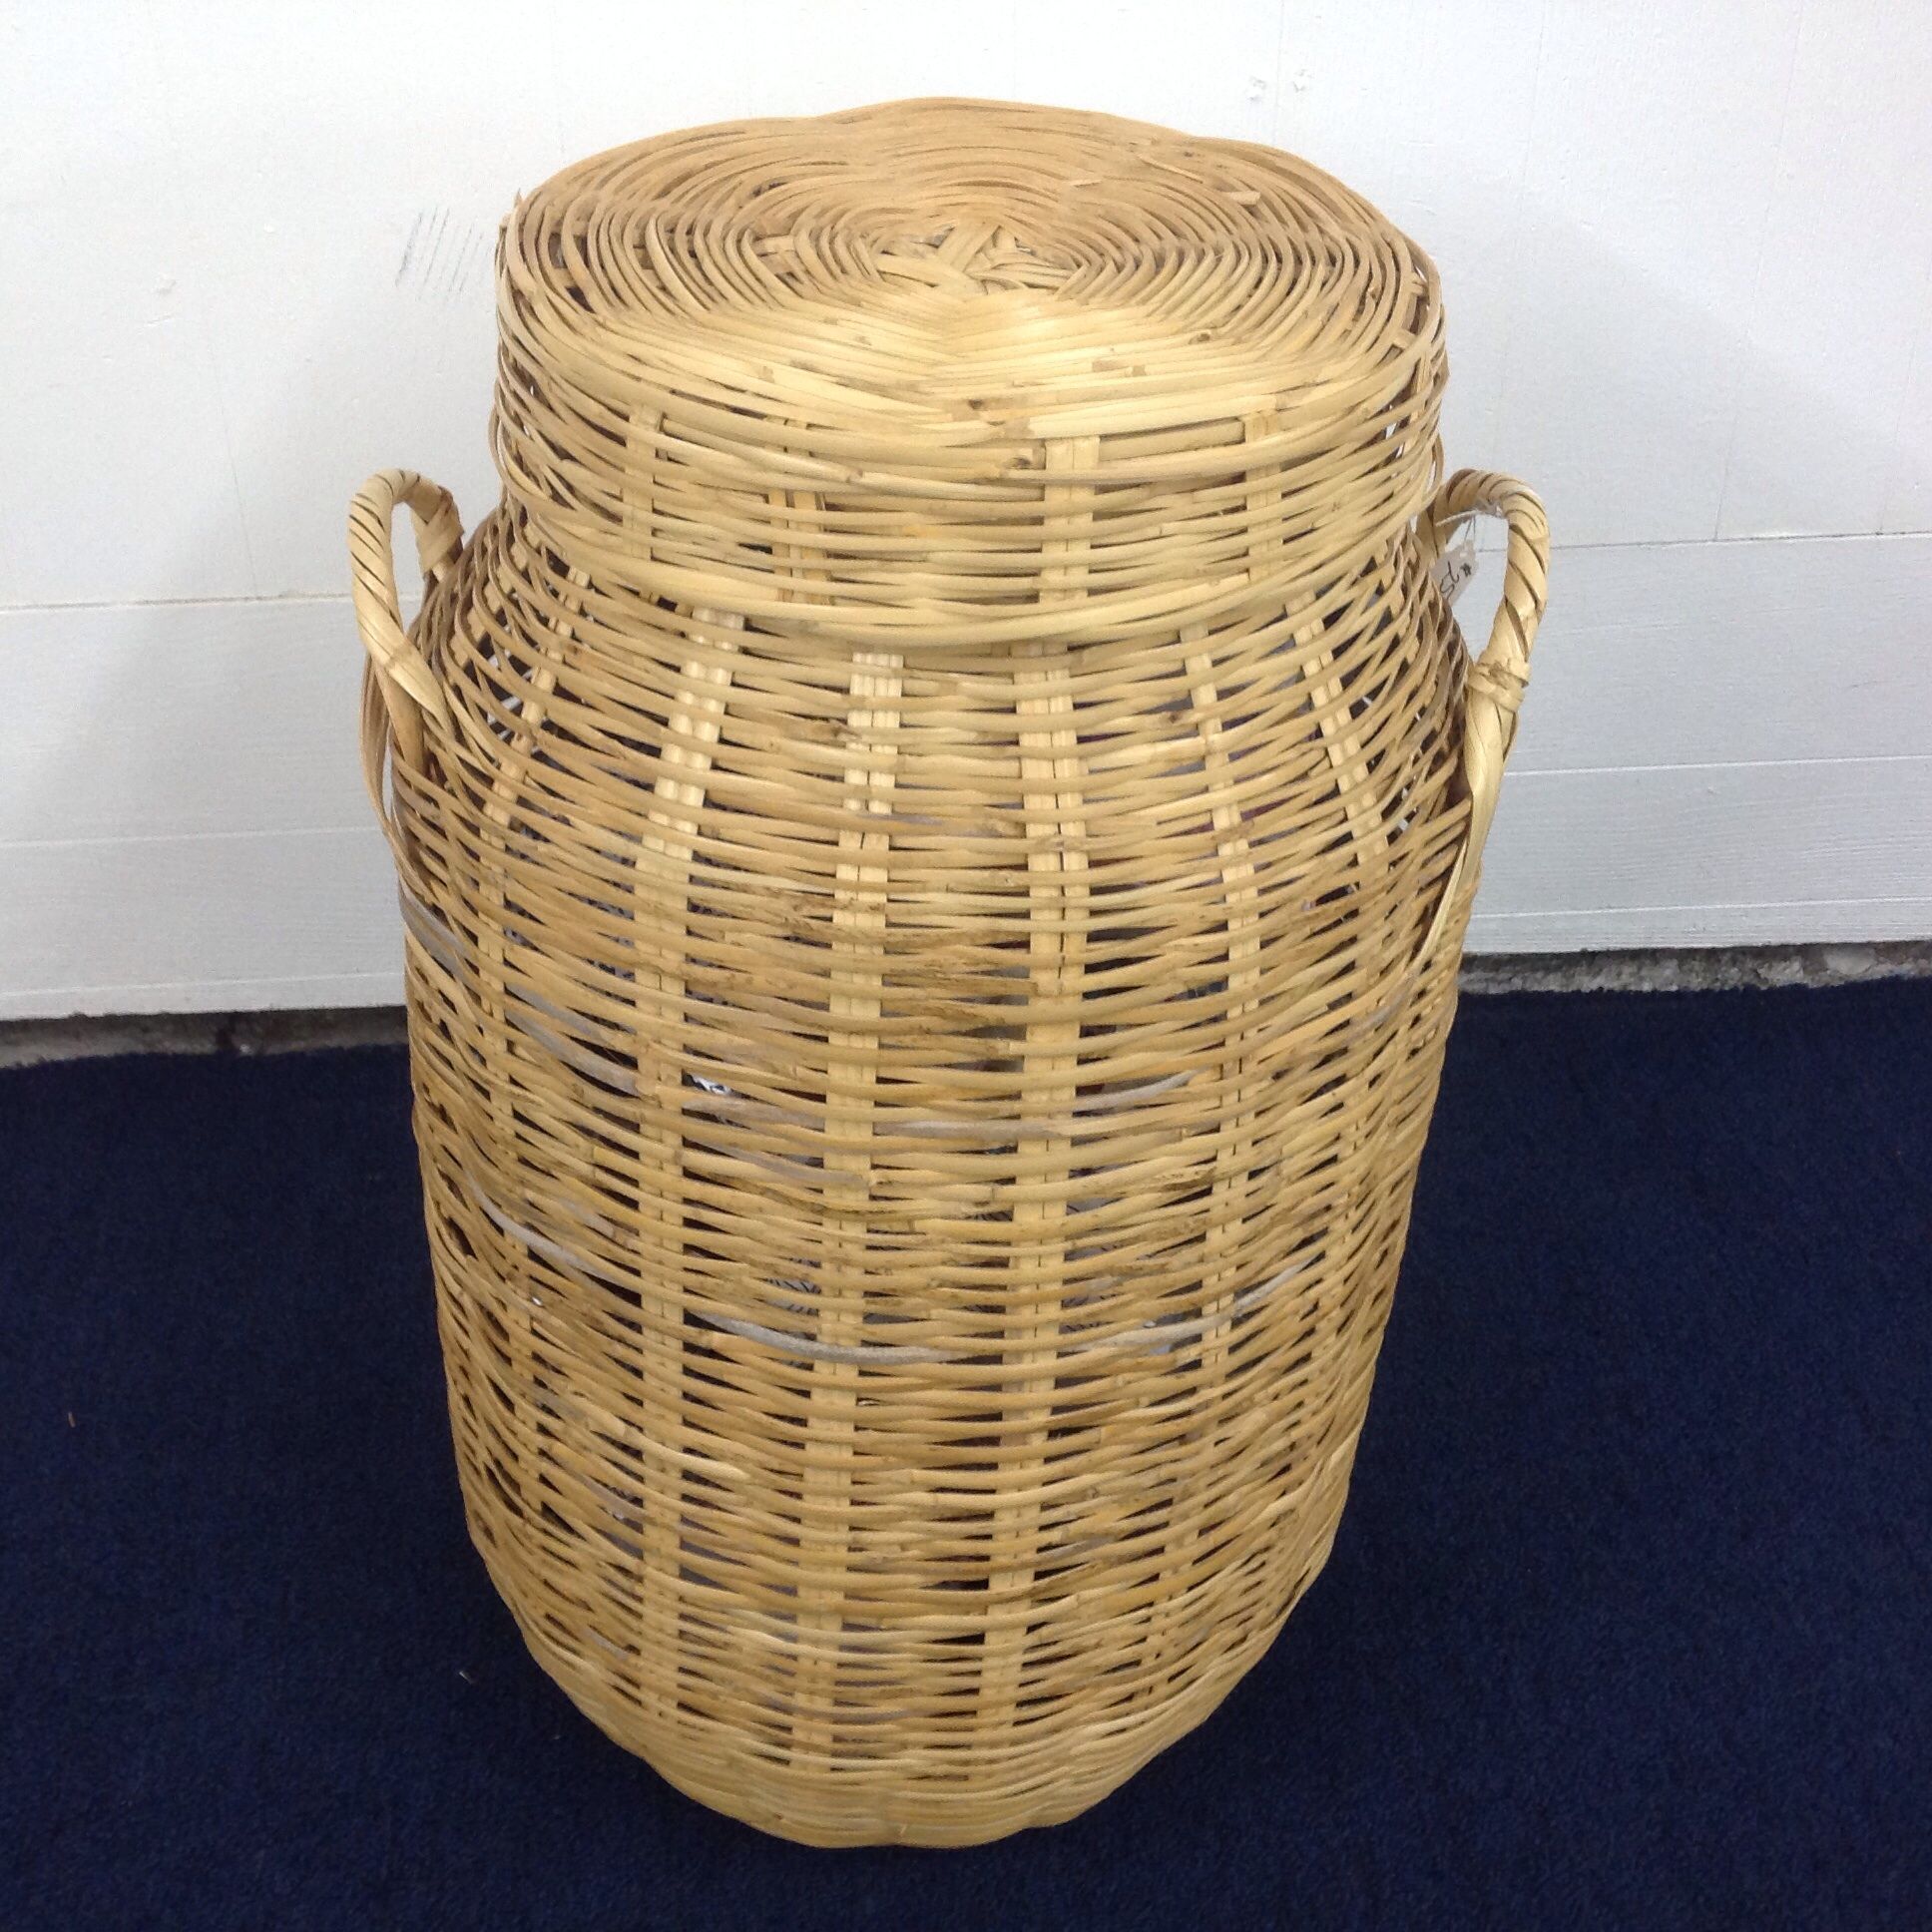 Lot Detail - WHAT IS IN THIS TALL WICKER BASKET?
